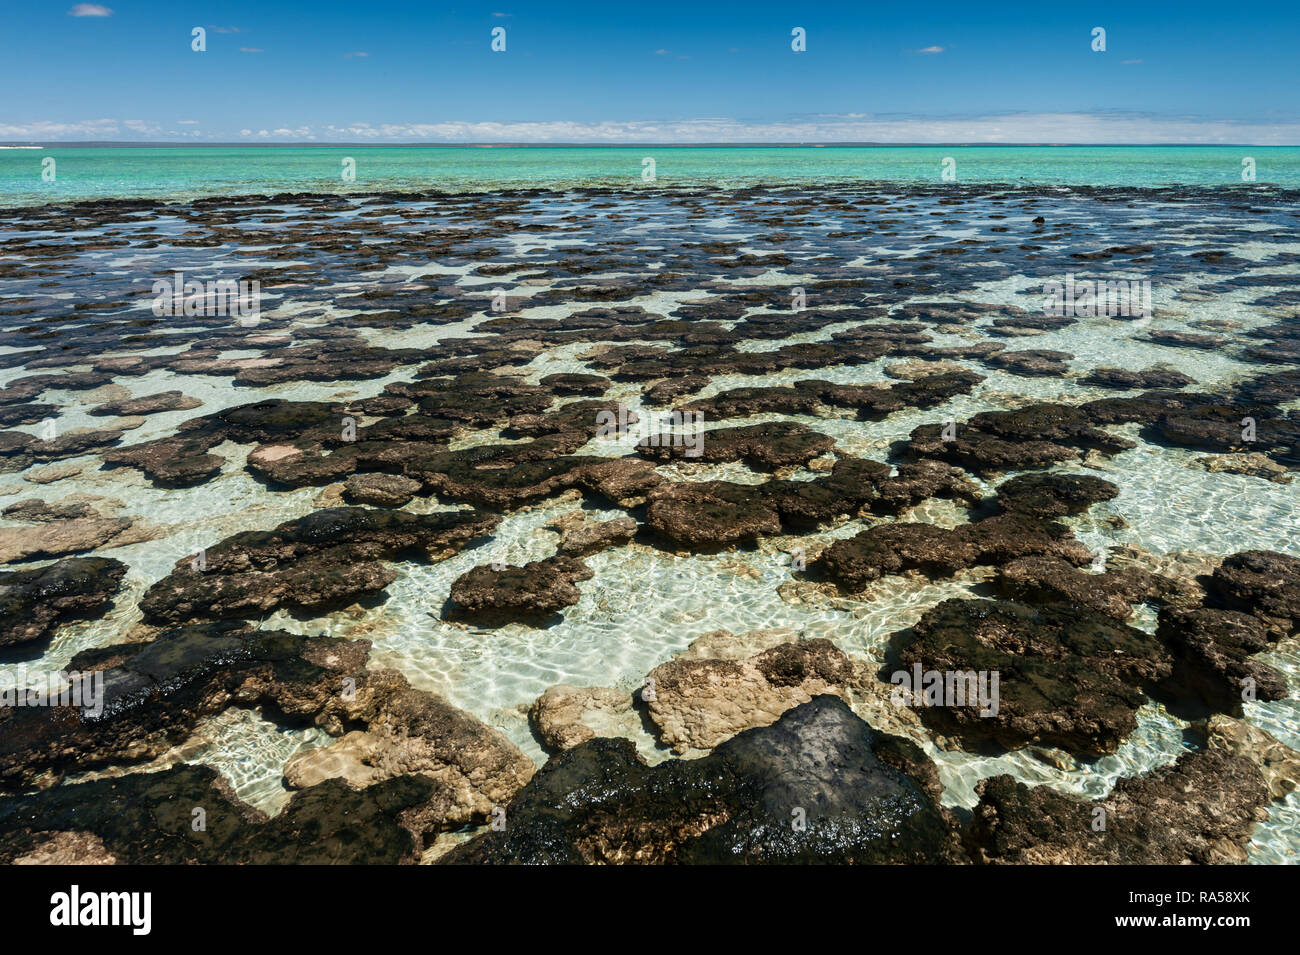 The Stromatolites are the number one attraction at Hamelin Pool, in the Shark Bay World Heritage Area. Stock Photo